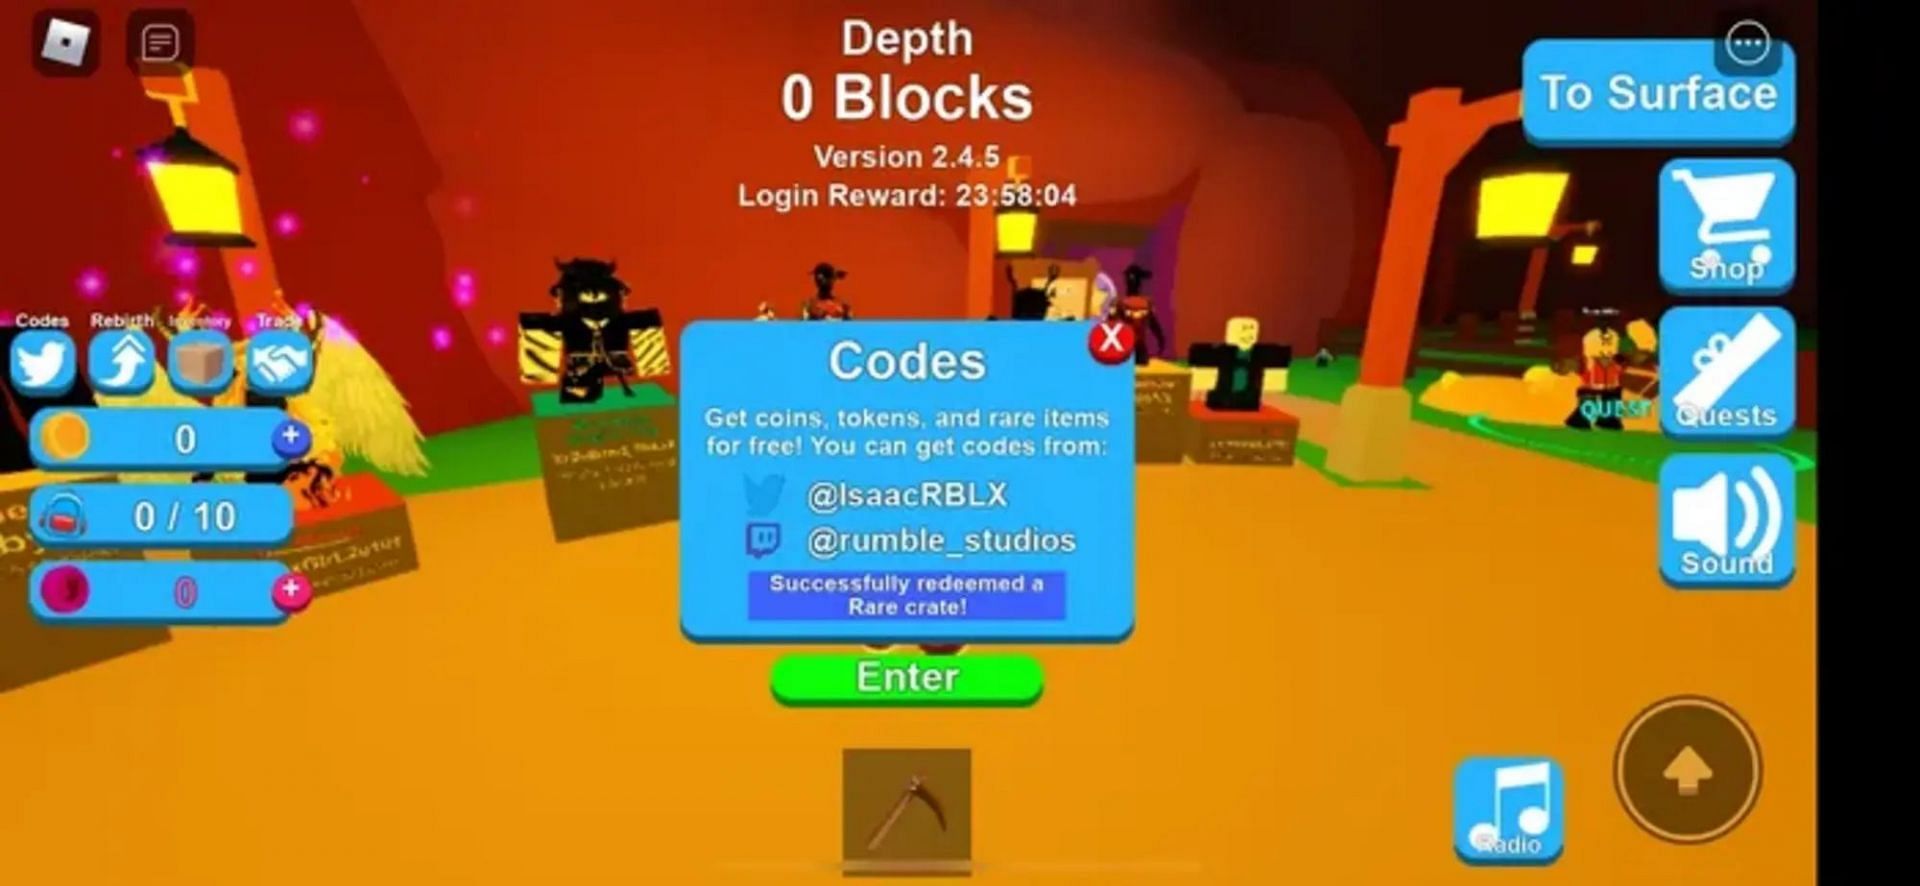 The code redemption screen (Image via Roblox)